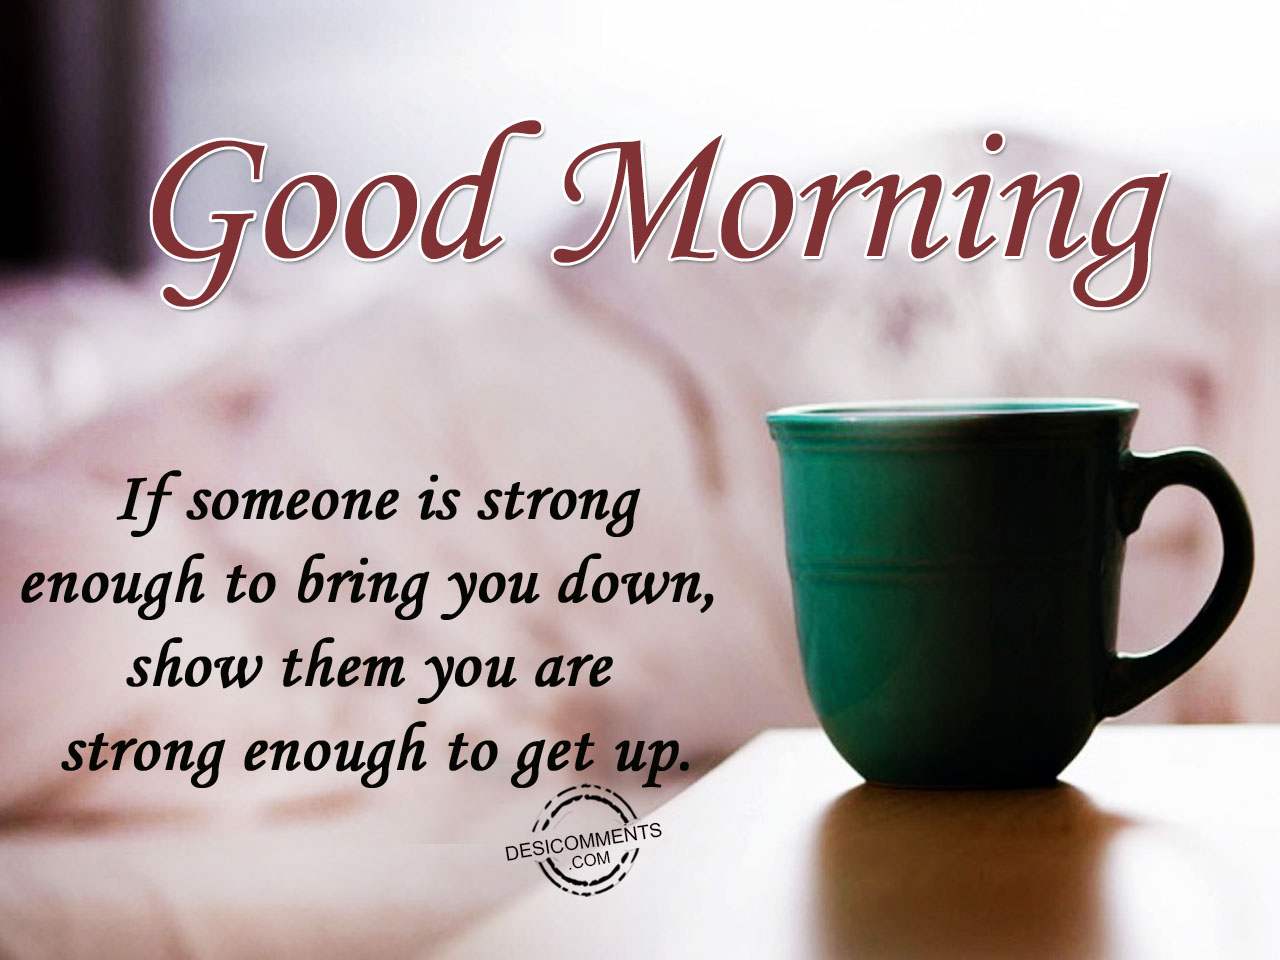 Good Morning With Inspirational Quote - DesiComments.com